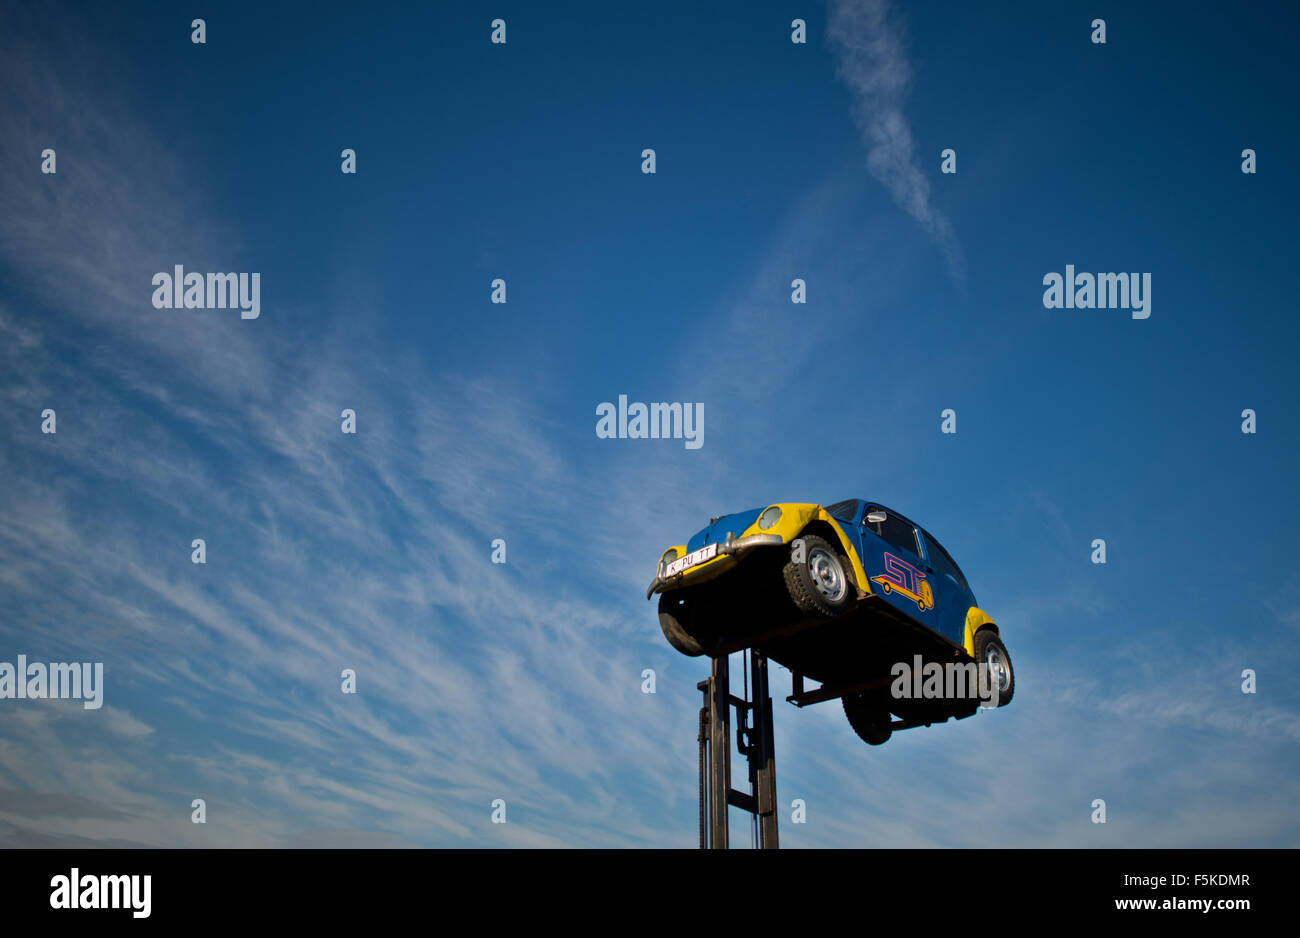 Peine, Germany. 05th Nov, 2015. An old Volkswagen Beetle with the license plate 'K-PU TT' (kaputt - broken) can be seen on a forklift at a junk yard in Peine, Germany, 05 November 2015. Photo: JULIAN STRATENSCHULTE/dpa/Alamy Live News Stock Photo